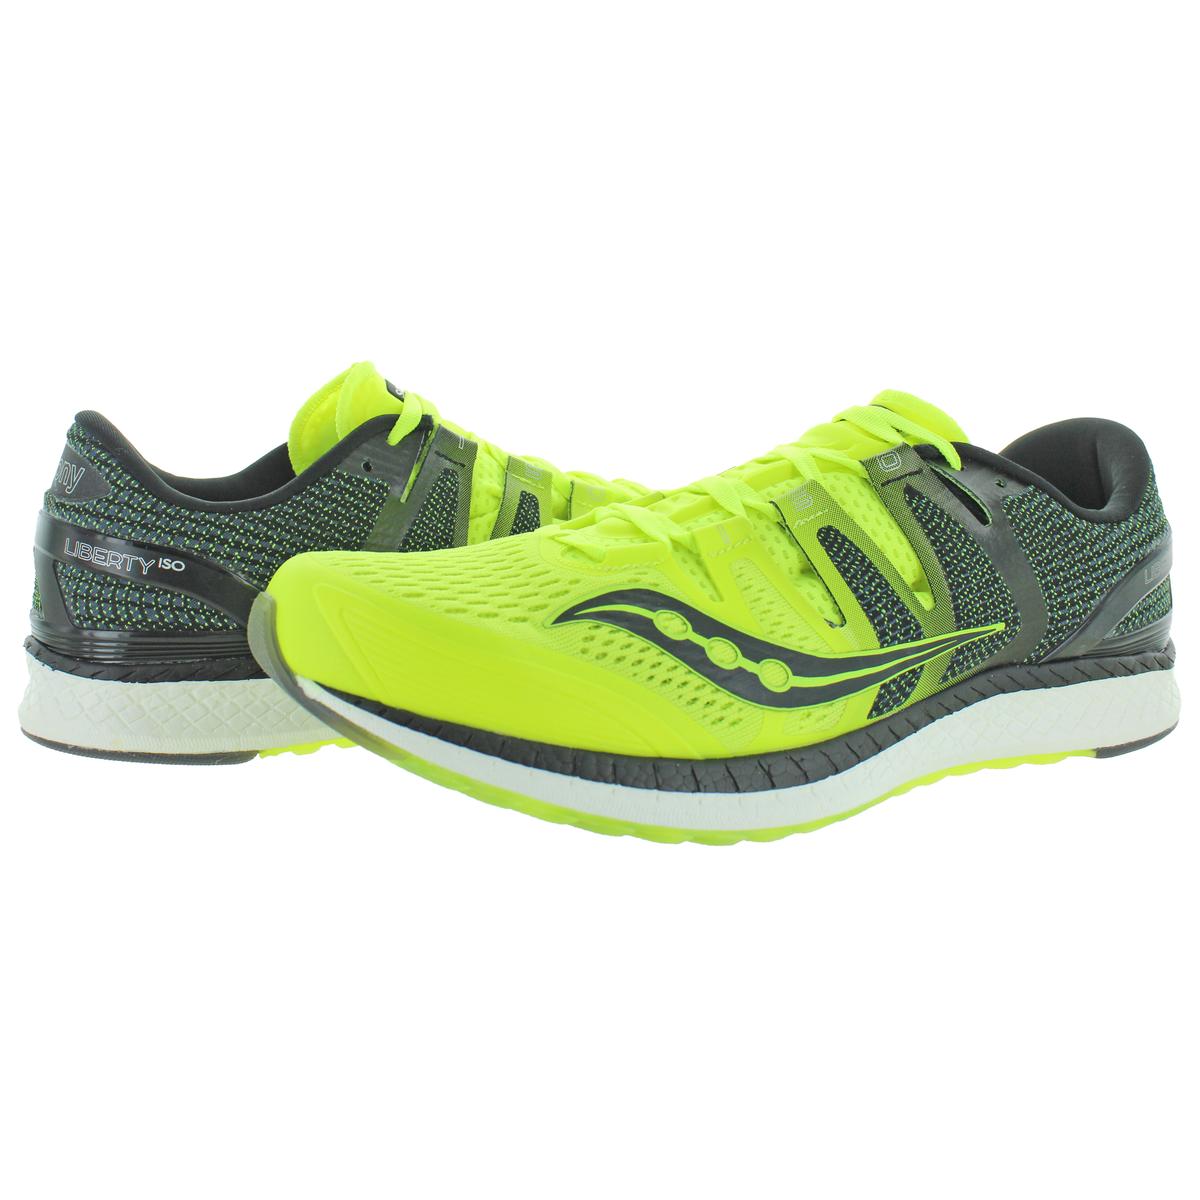 liberty sports shoes price list